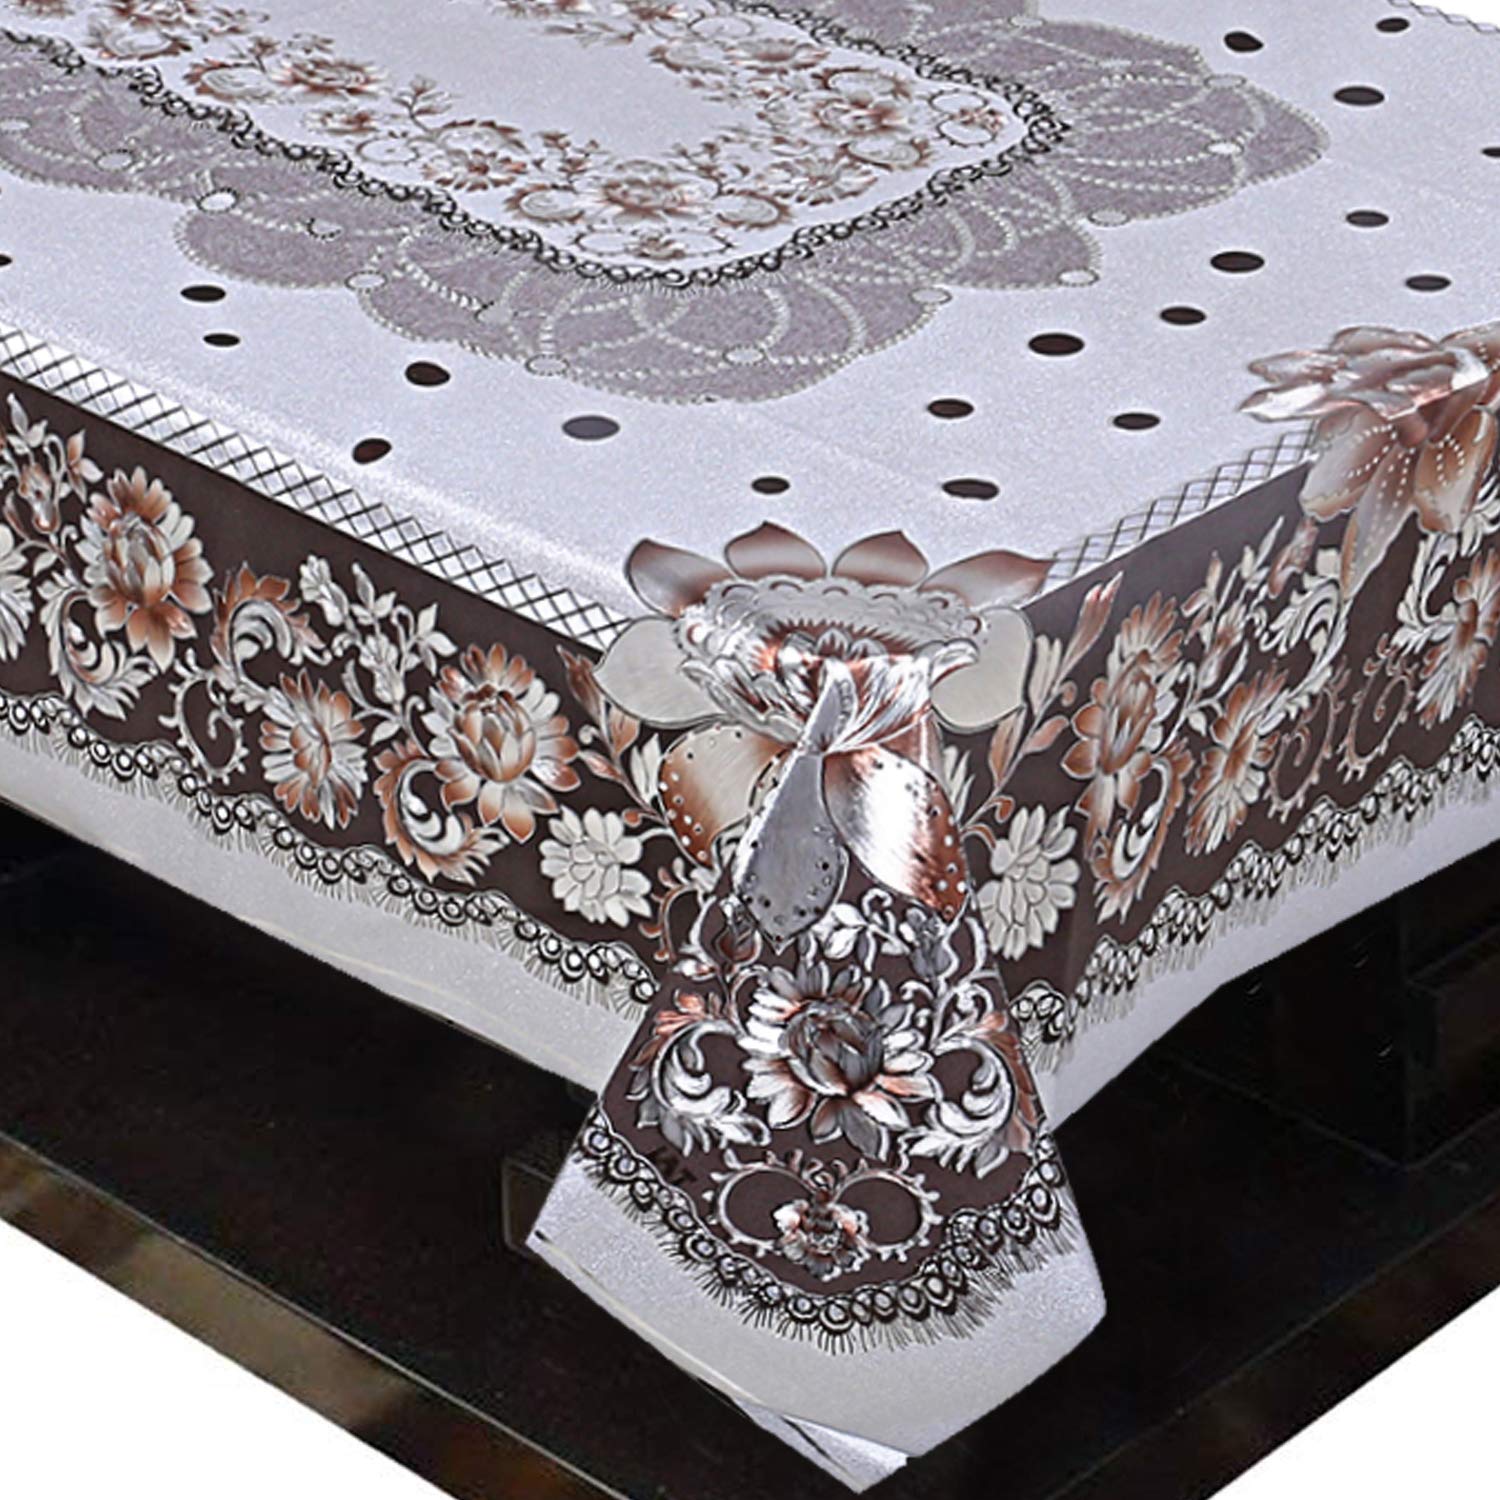 Kuber Industries Shining Floral Design PVC 4 Seater Center Table Cover (Silver), CTKTC13883, Standard